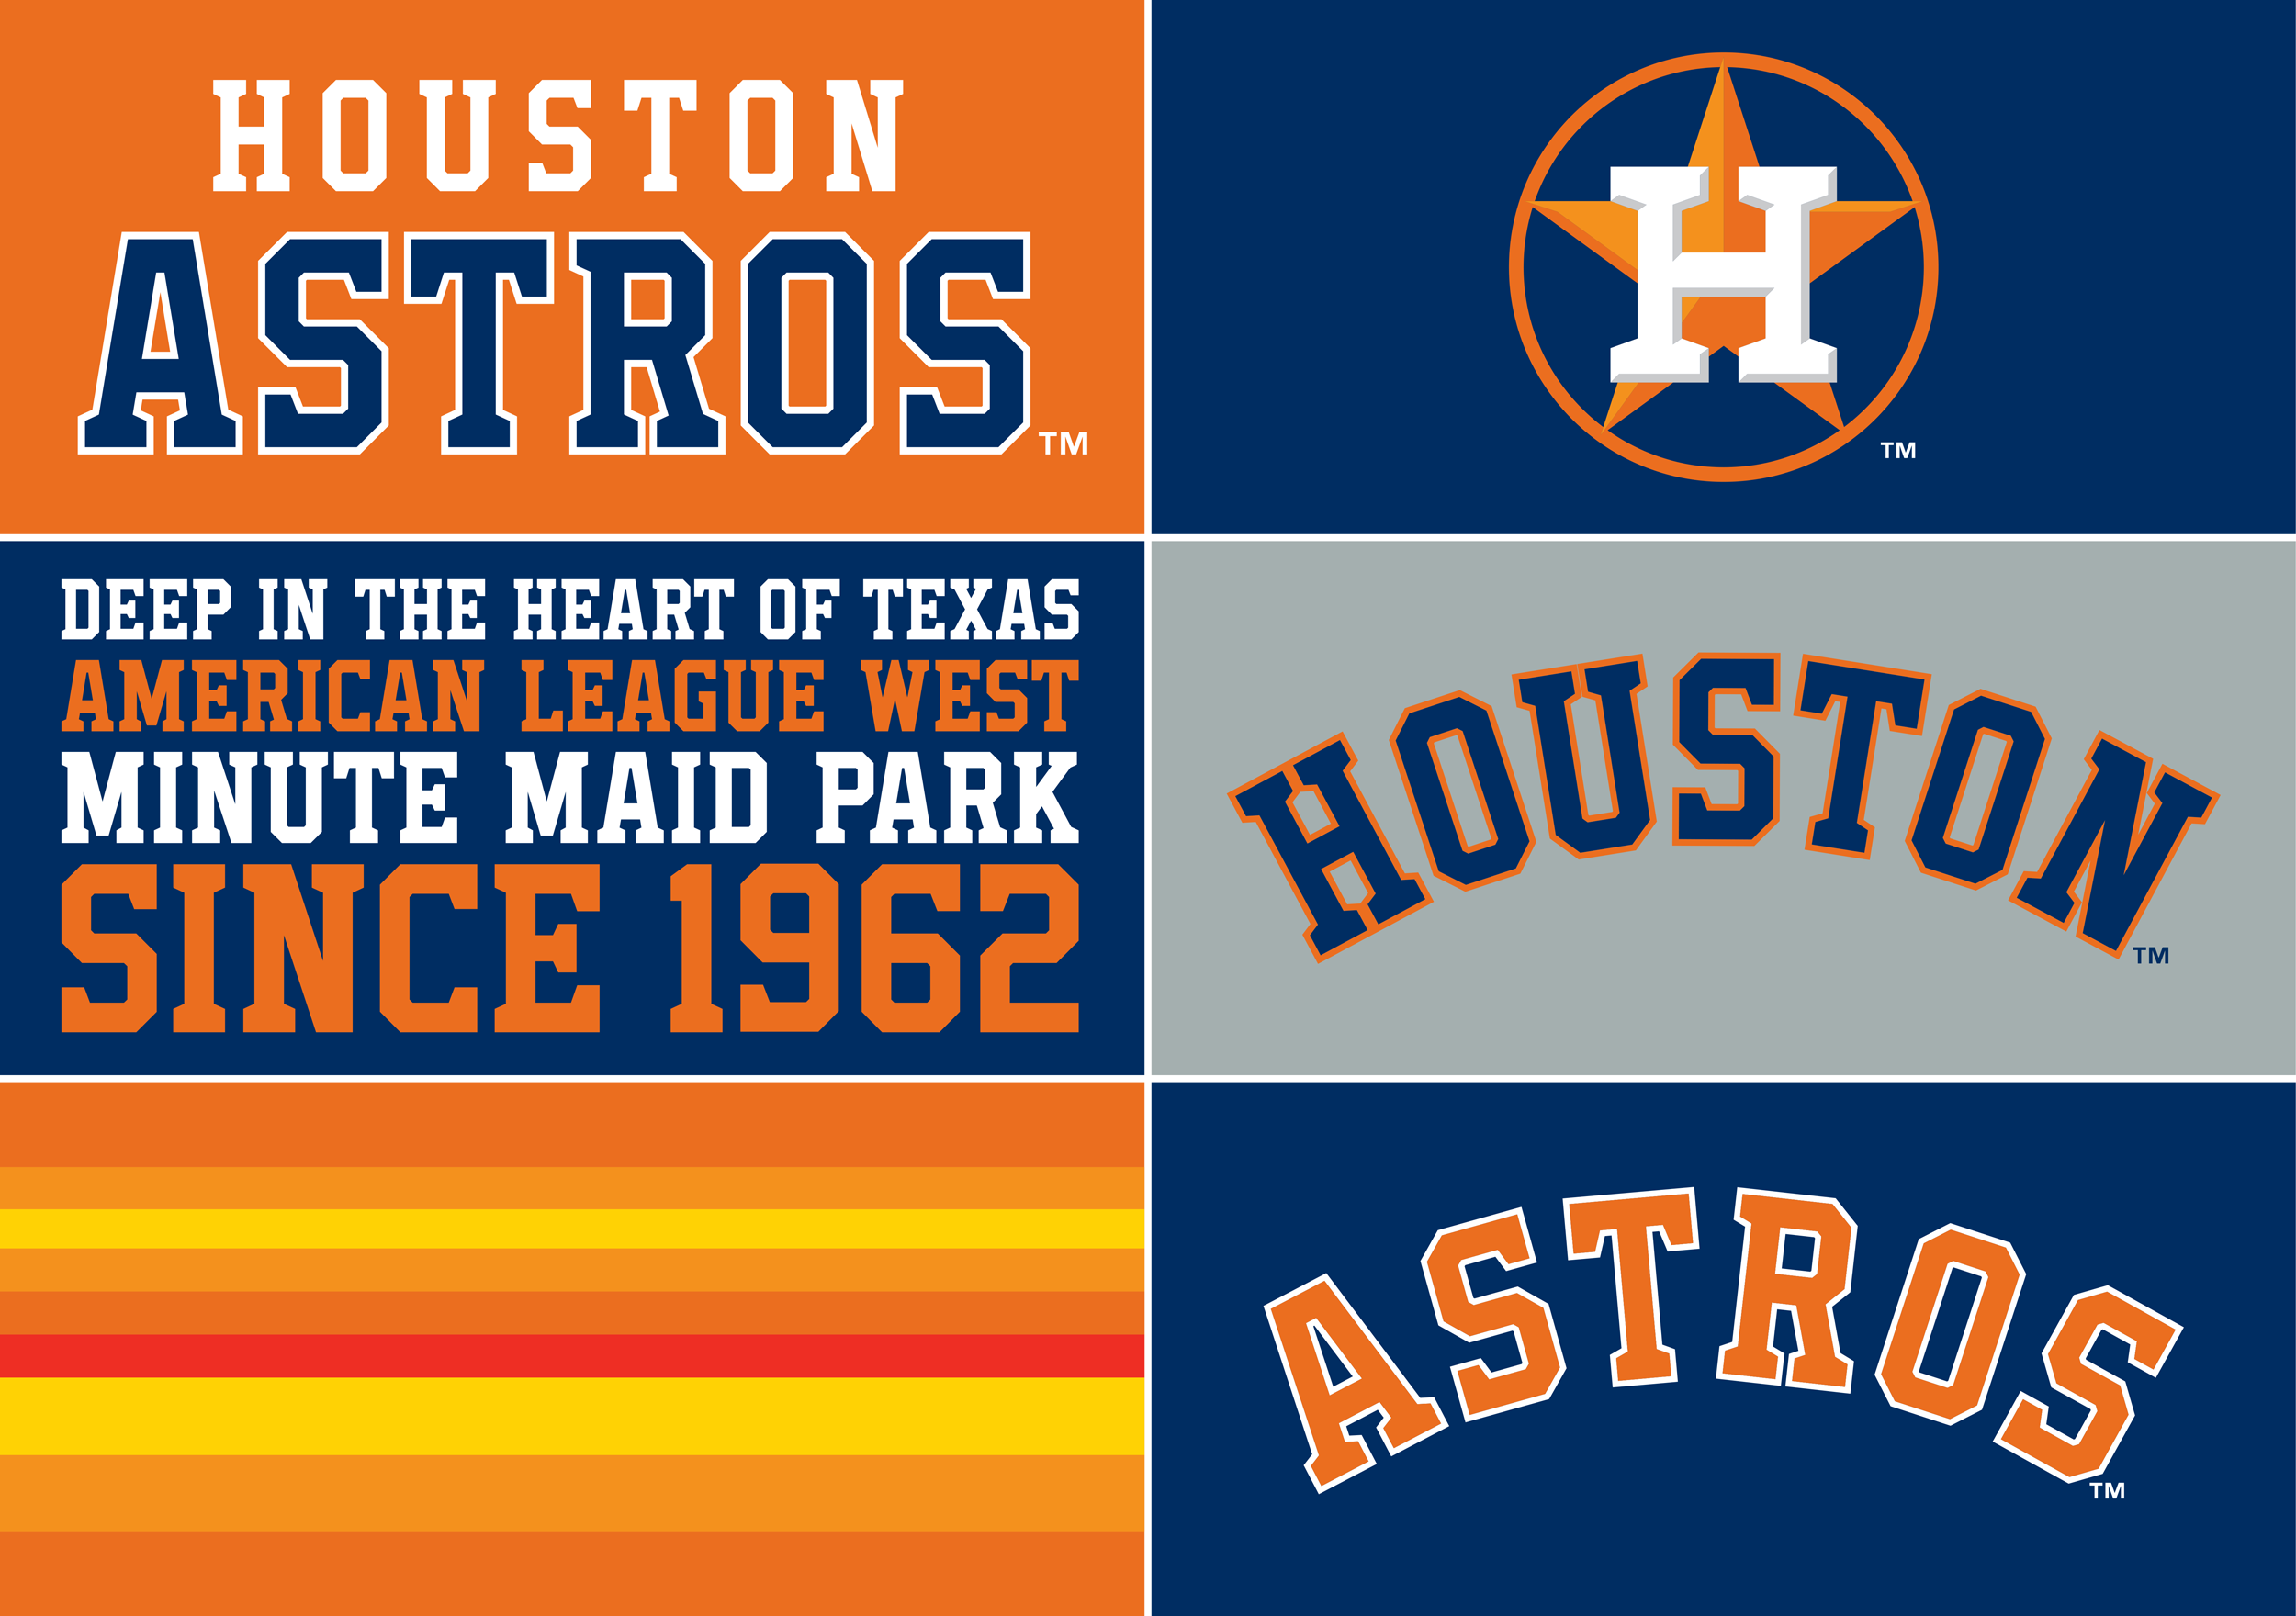 What Are the Houston Astros Colors